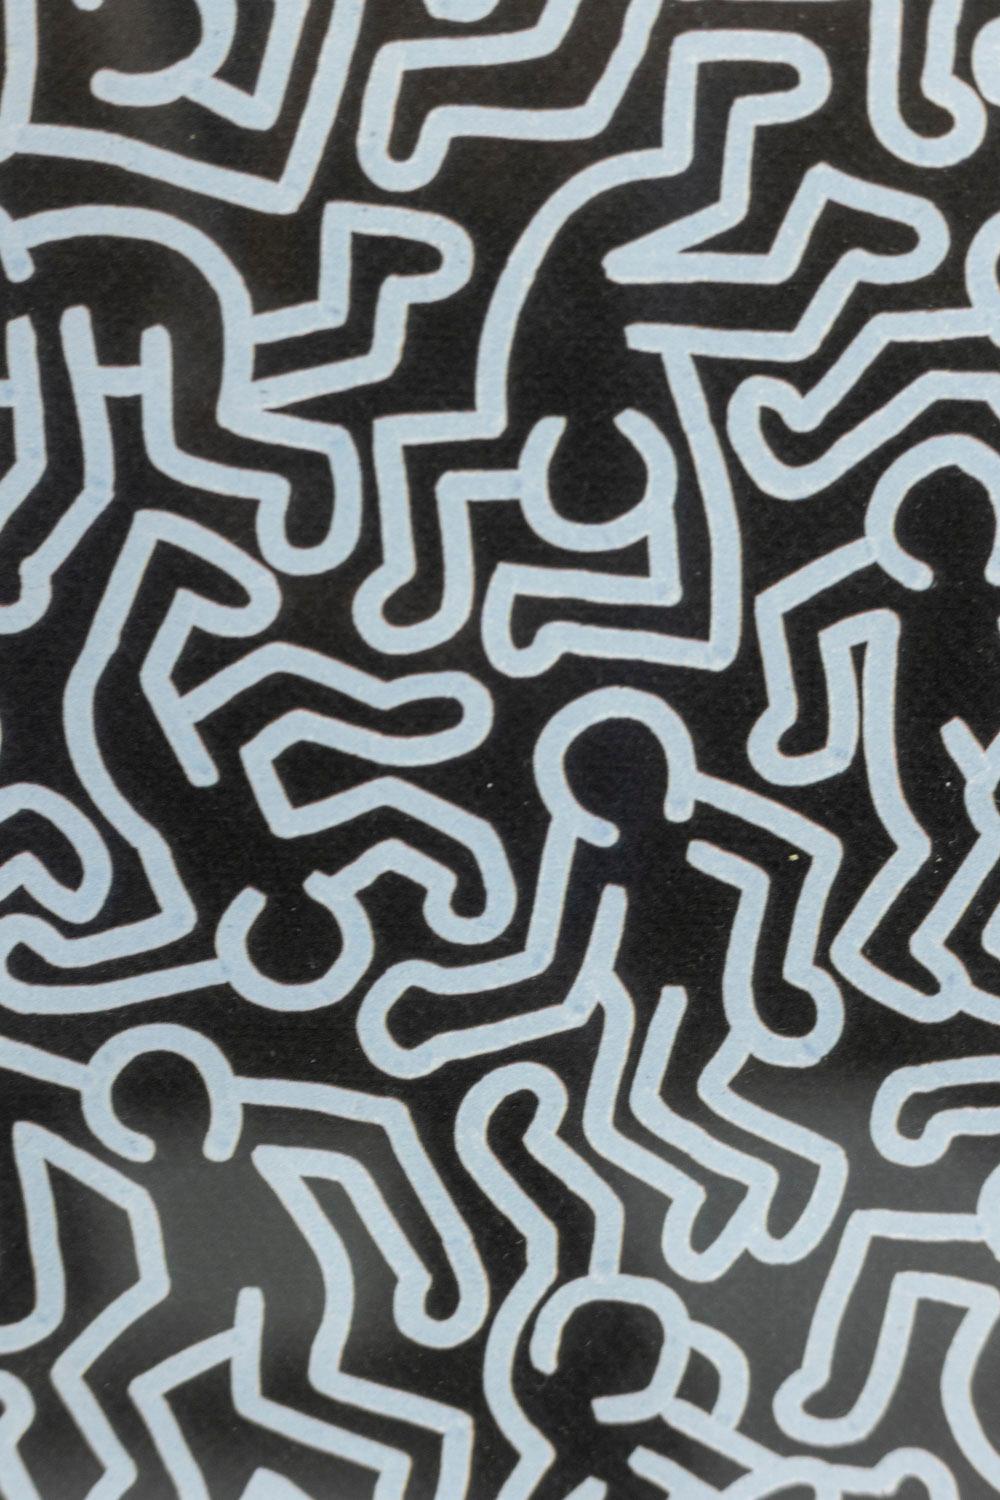 Américain Keith Haring, lithographie, années 1990